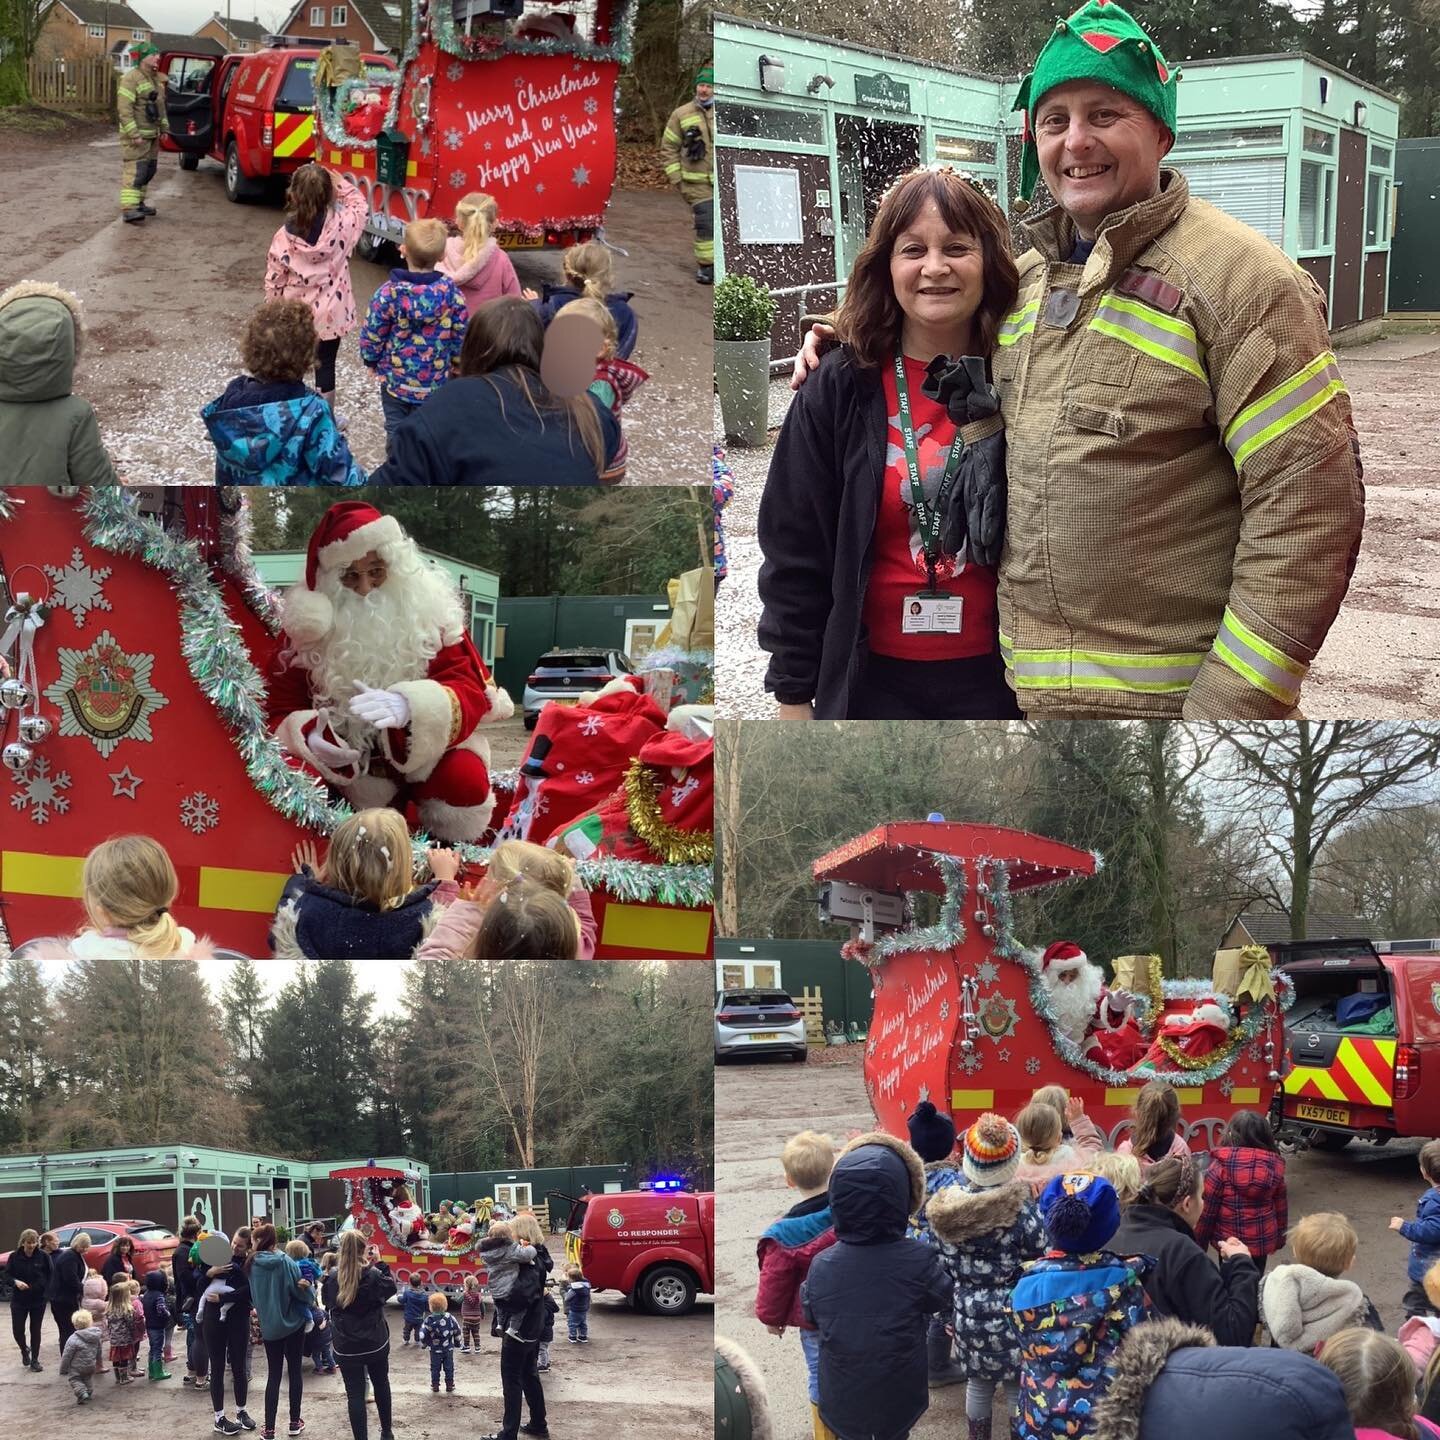 We had a special visitor here at Greenwoods this morning ⭐️ A big thank you to Coleford fire crew for spreading some festive cheer 🎅 The children absolutely loved it 😀